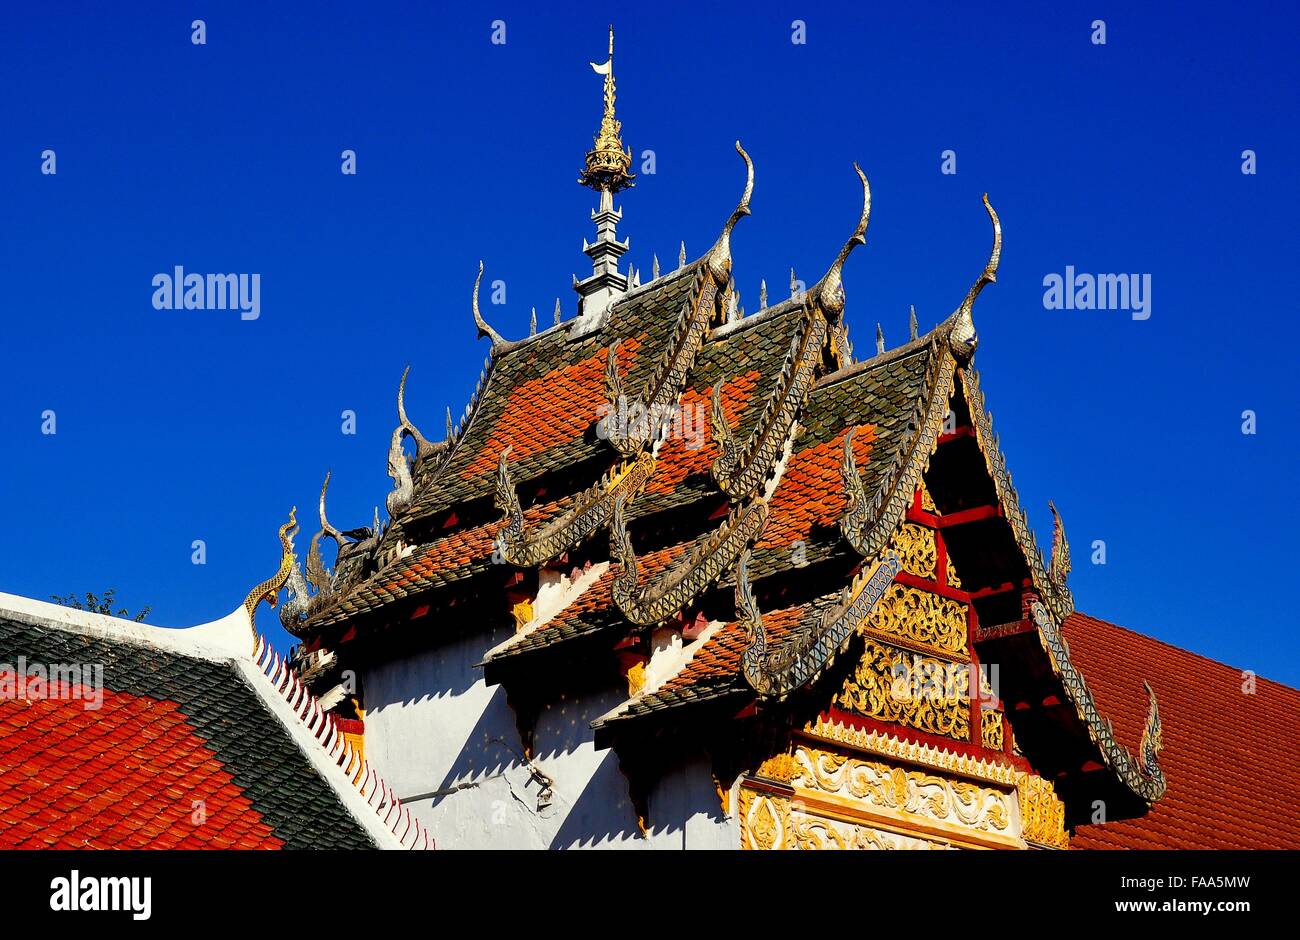 Lamphun, Thailand - December 28, 2012: Opulent gabled roof with ornate gilded chofah ornaments at Thai wat * Stock Photo